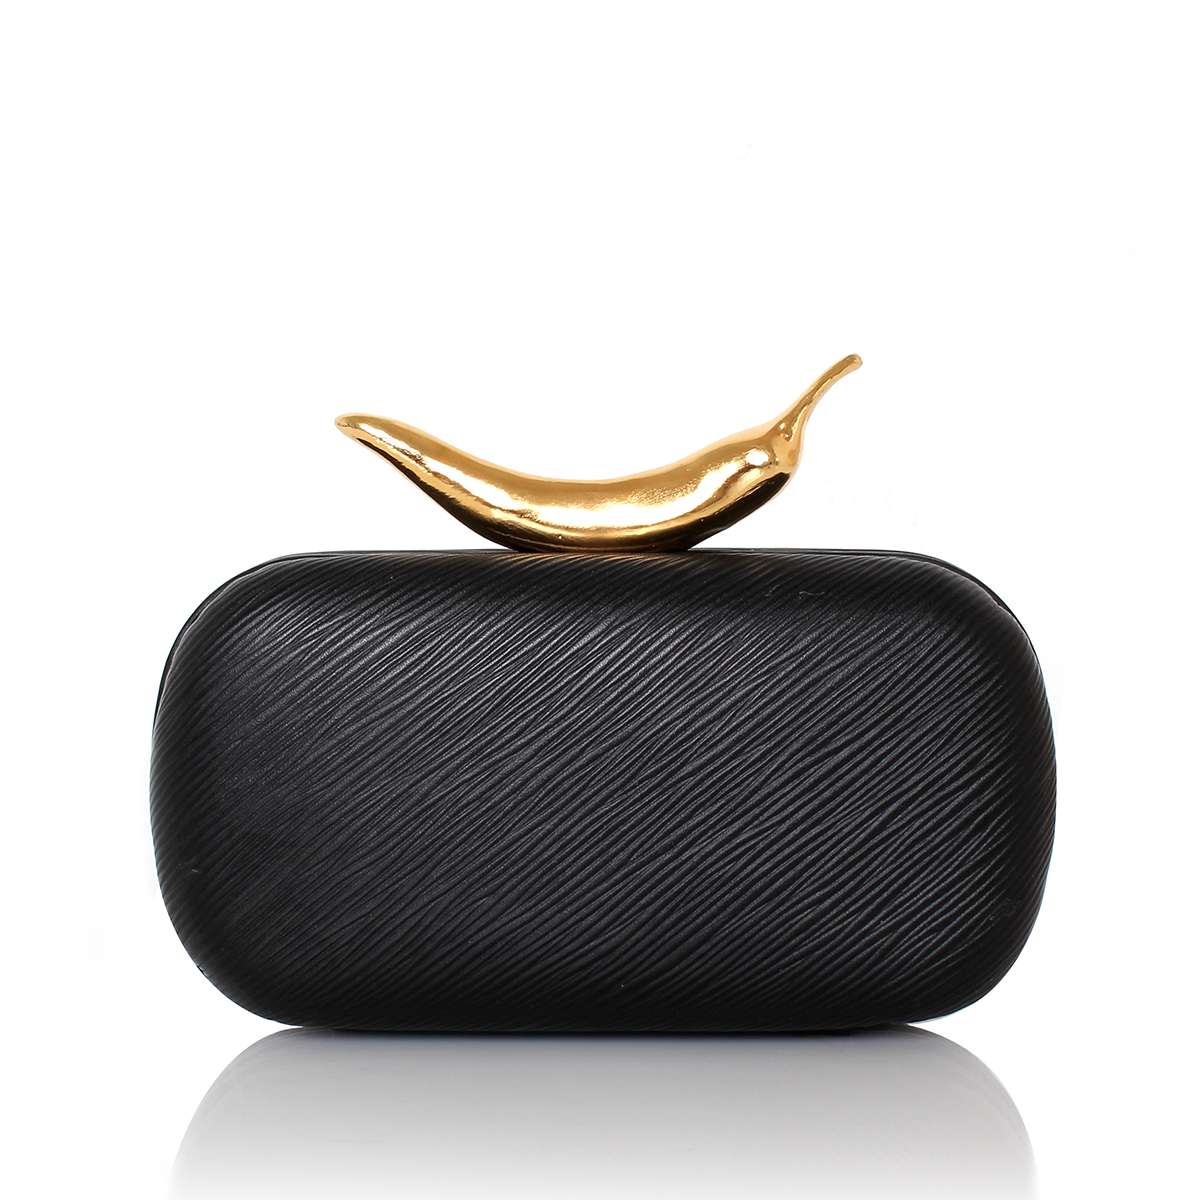 shopping-guide-to-the-best-clutch-bags-sarahs-bag-chilli-clutch